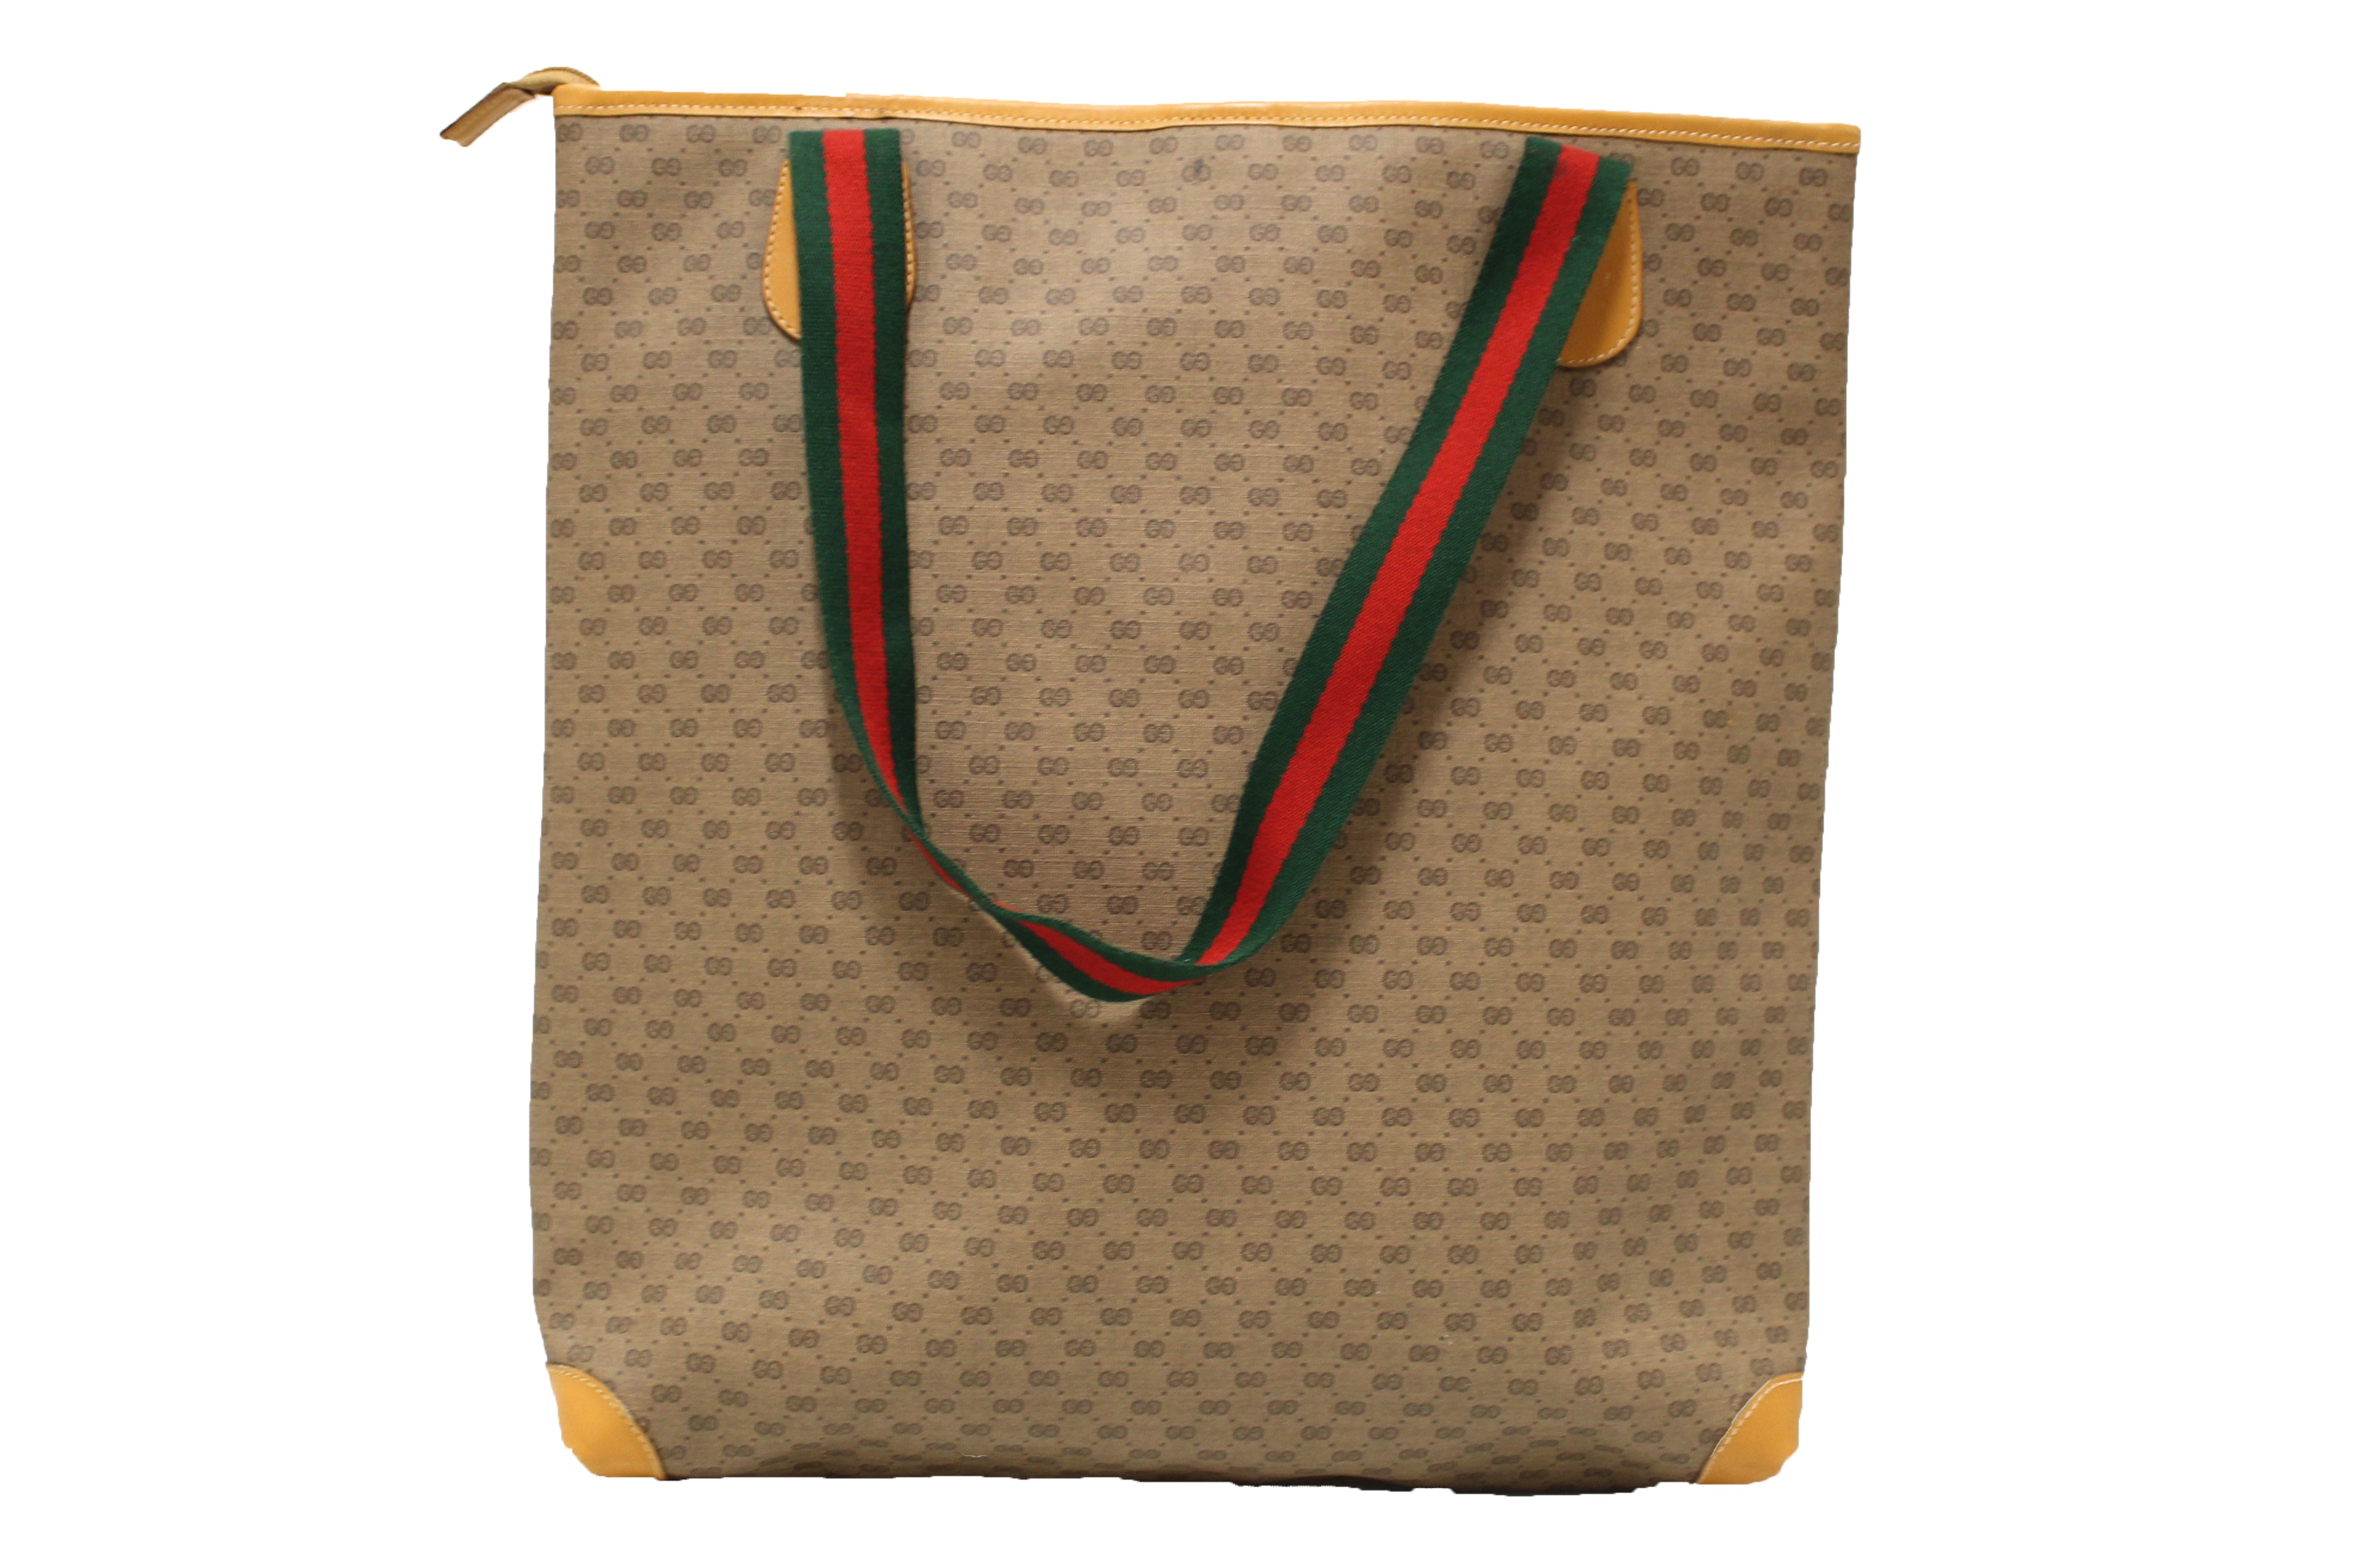 Authentic Gucci Vintage Brown GG Canvas with Web Stripes Strap Tote Bag